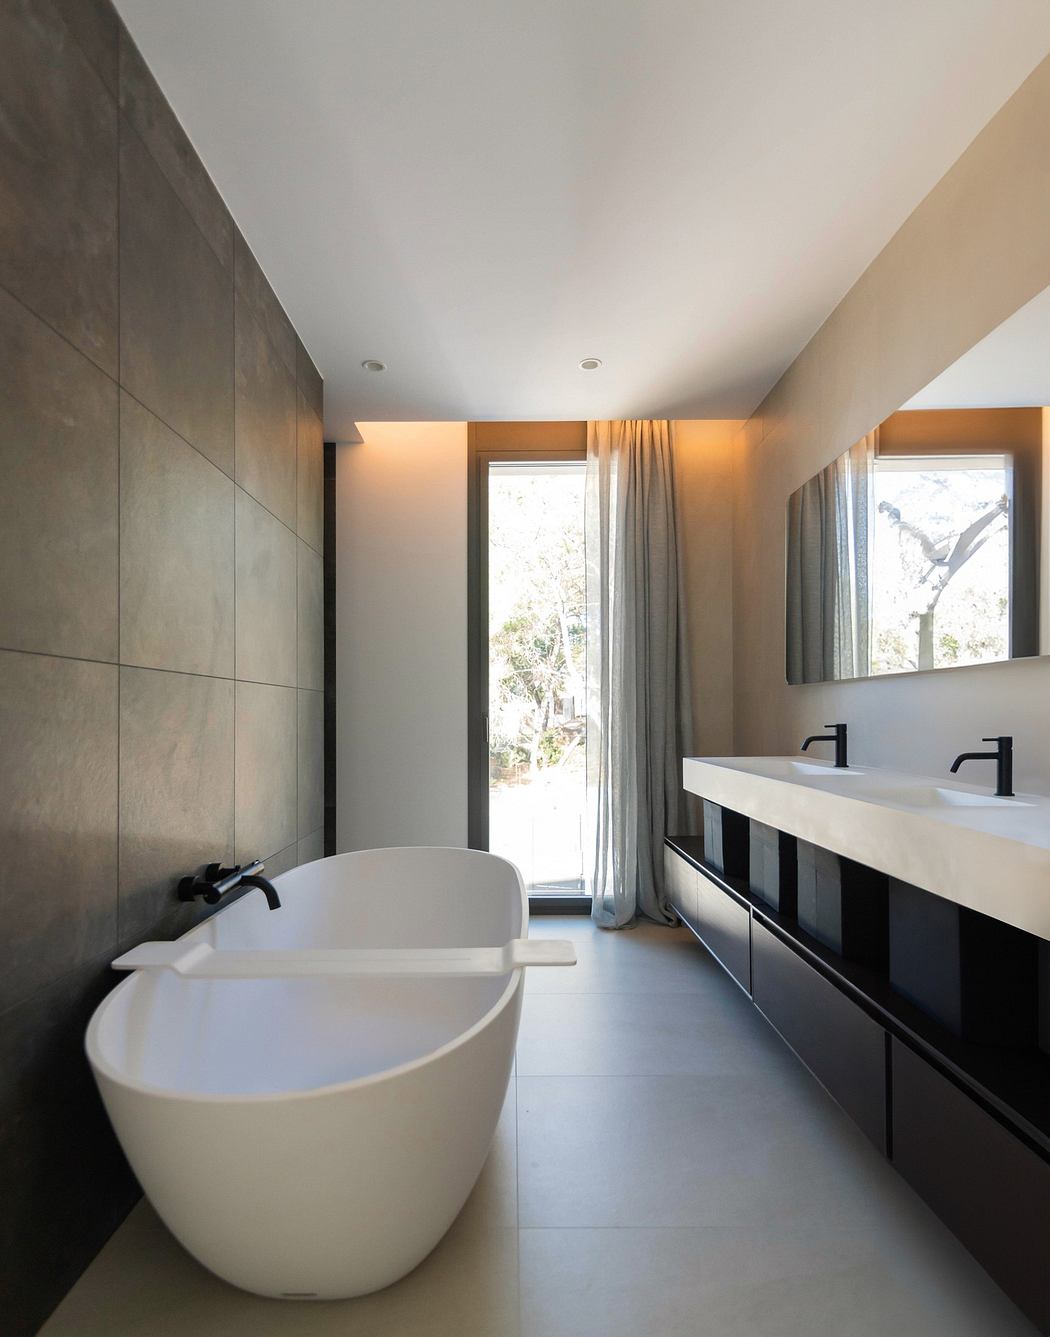 Modern bathroom with a freestanding tub, double vanity, and large window.